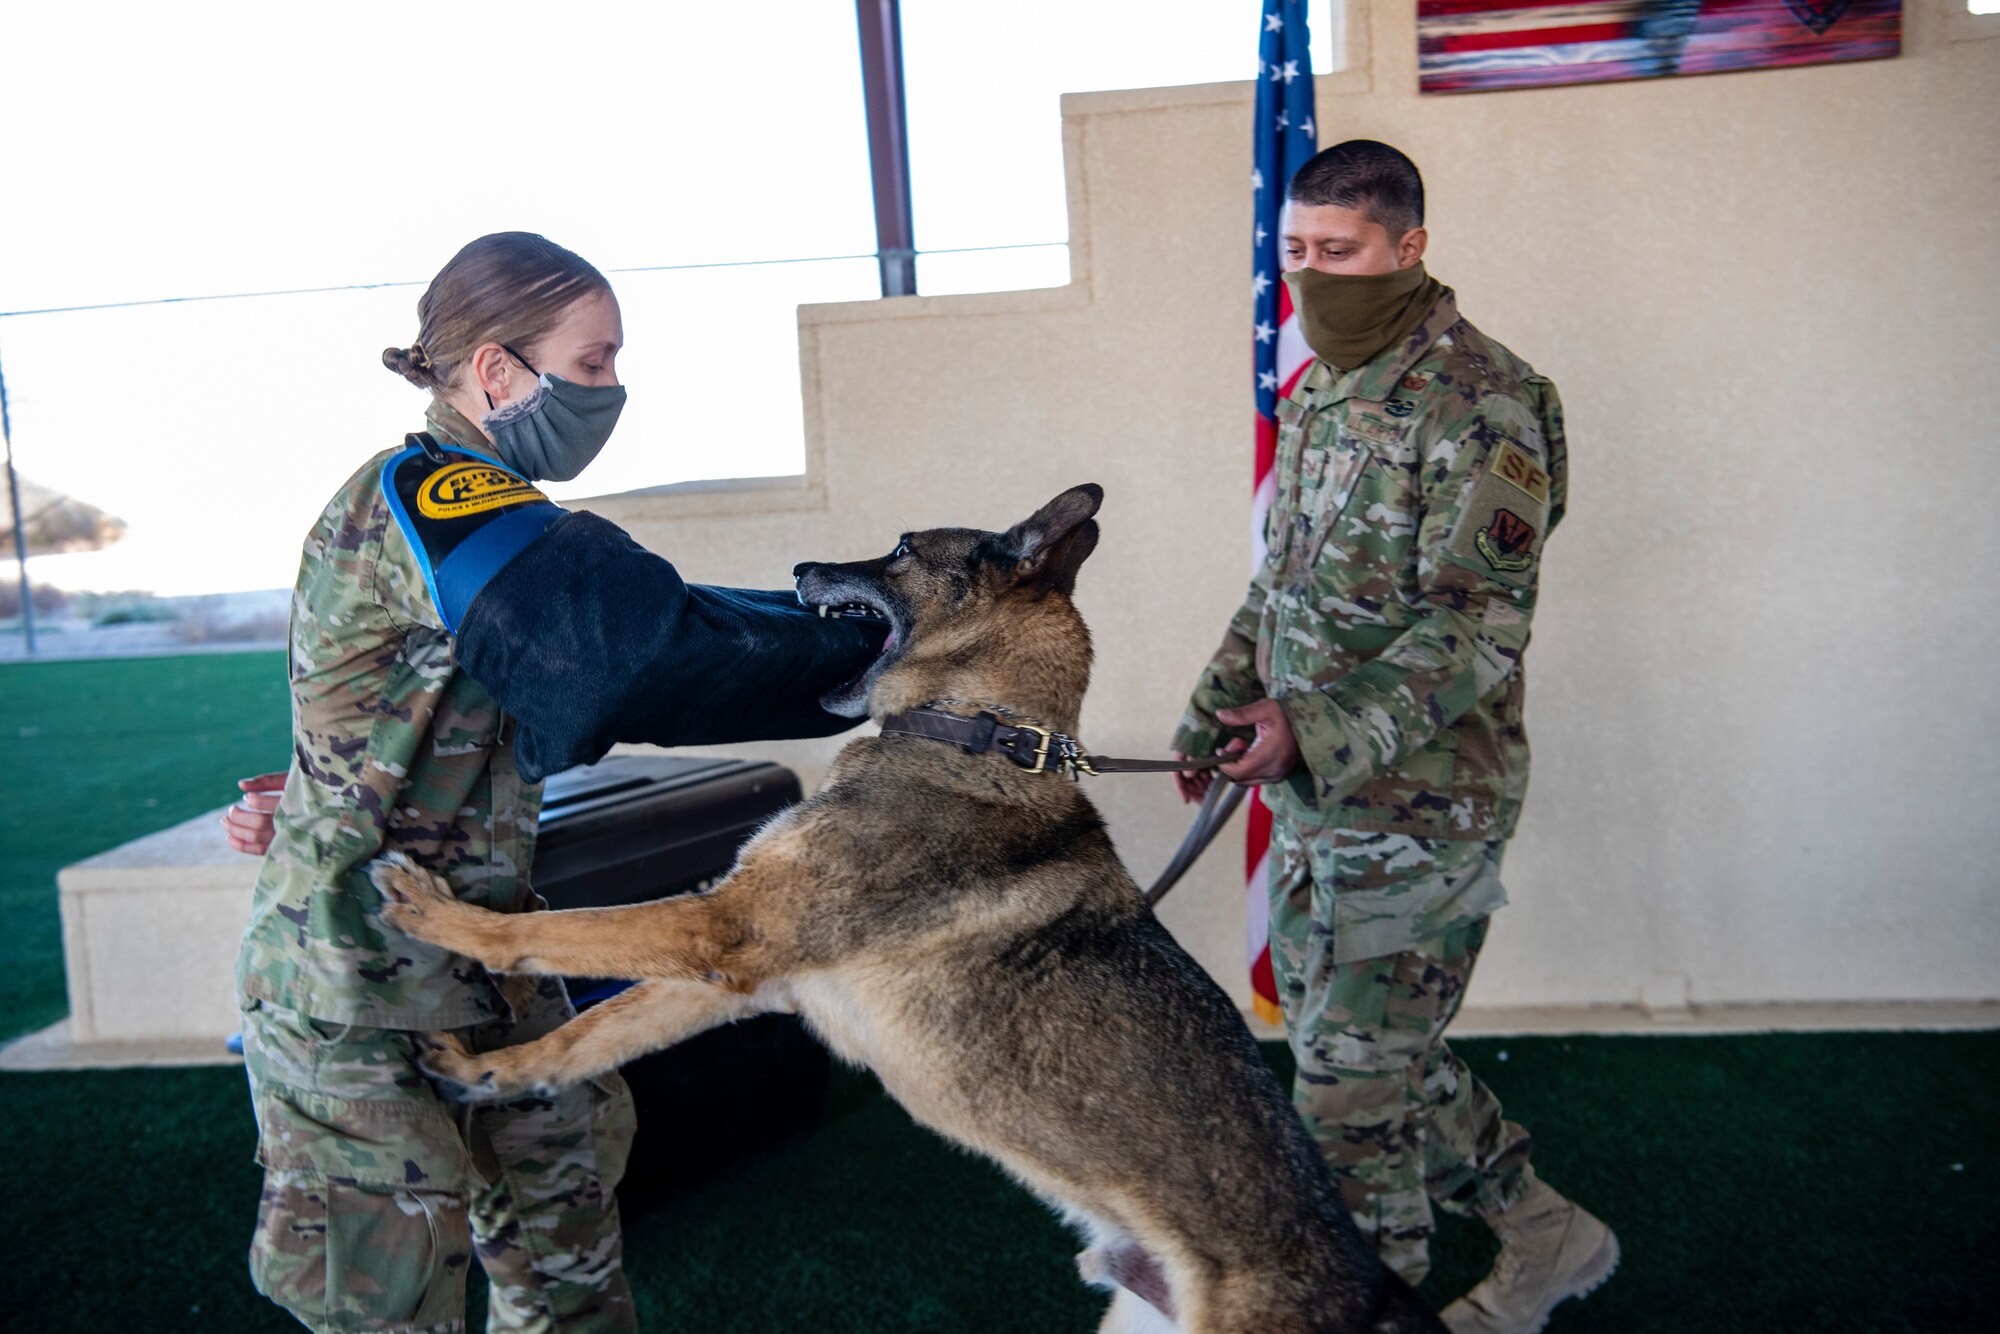 Military working dog bites a security forces member who is wearing protective training gear.